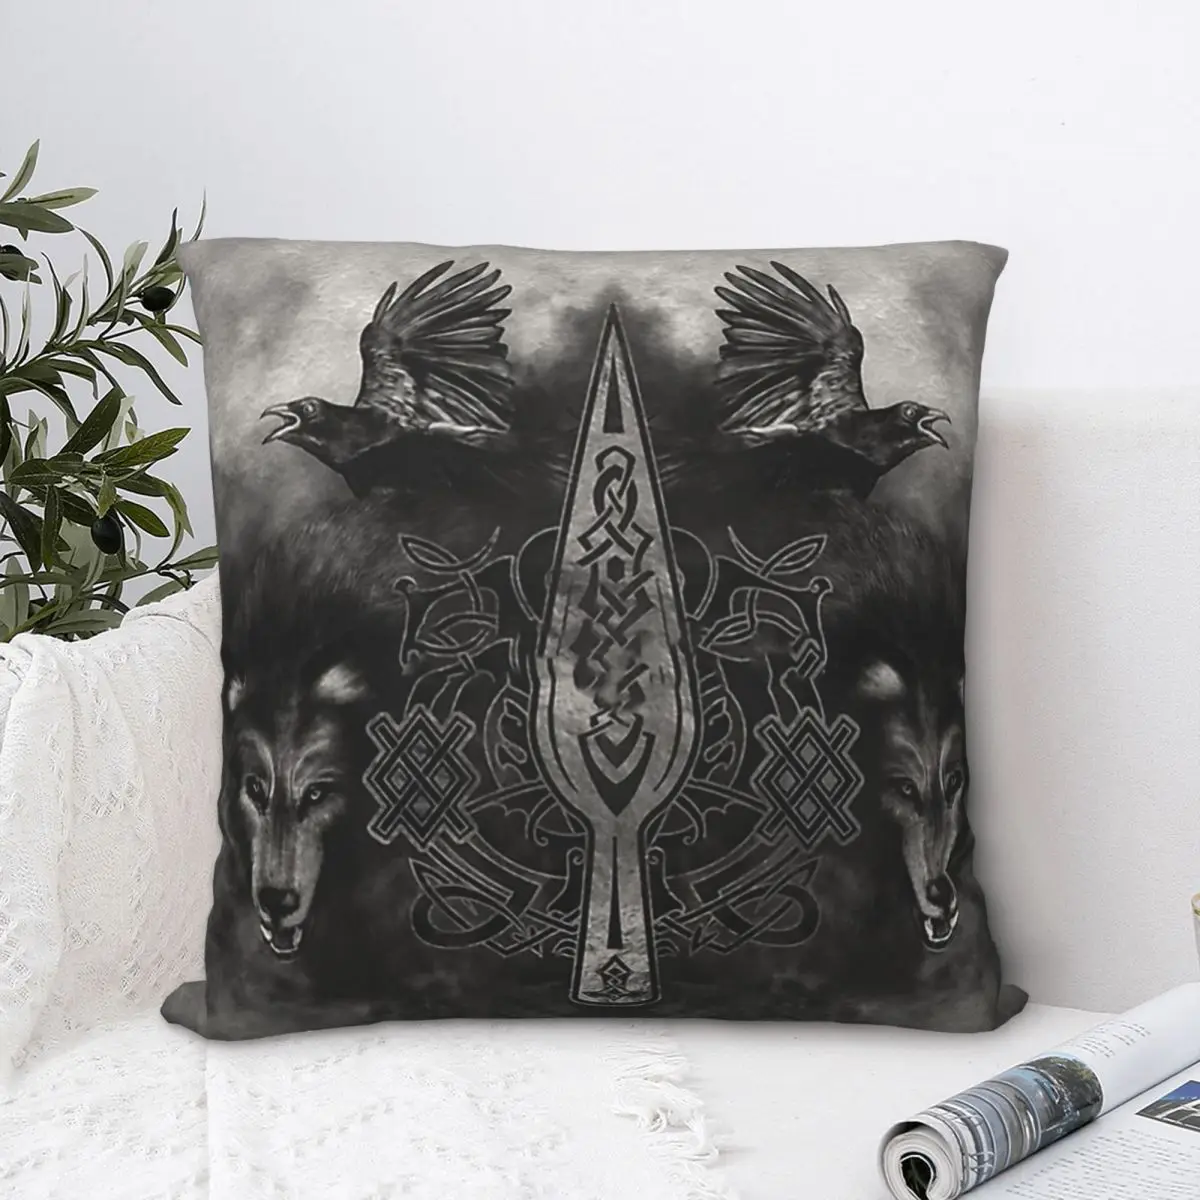 

Gungnir Spear Of Odin Polyester Cushion Cover Viking Norse Mythology For Bedroom Office Decorative Soft Pillow Cover